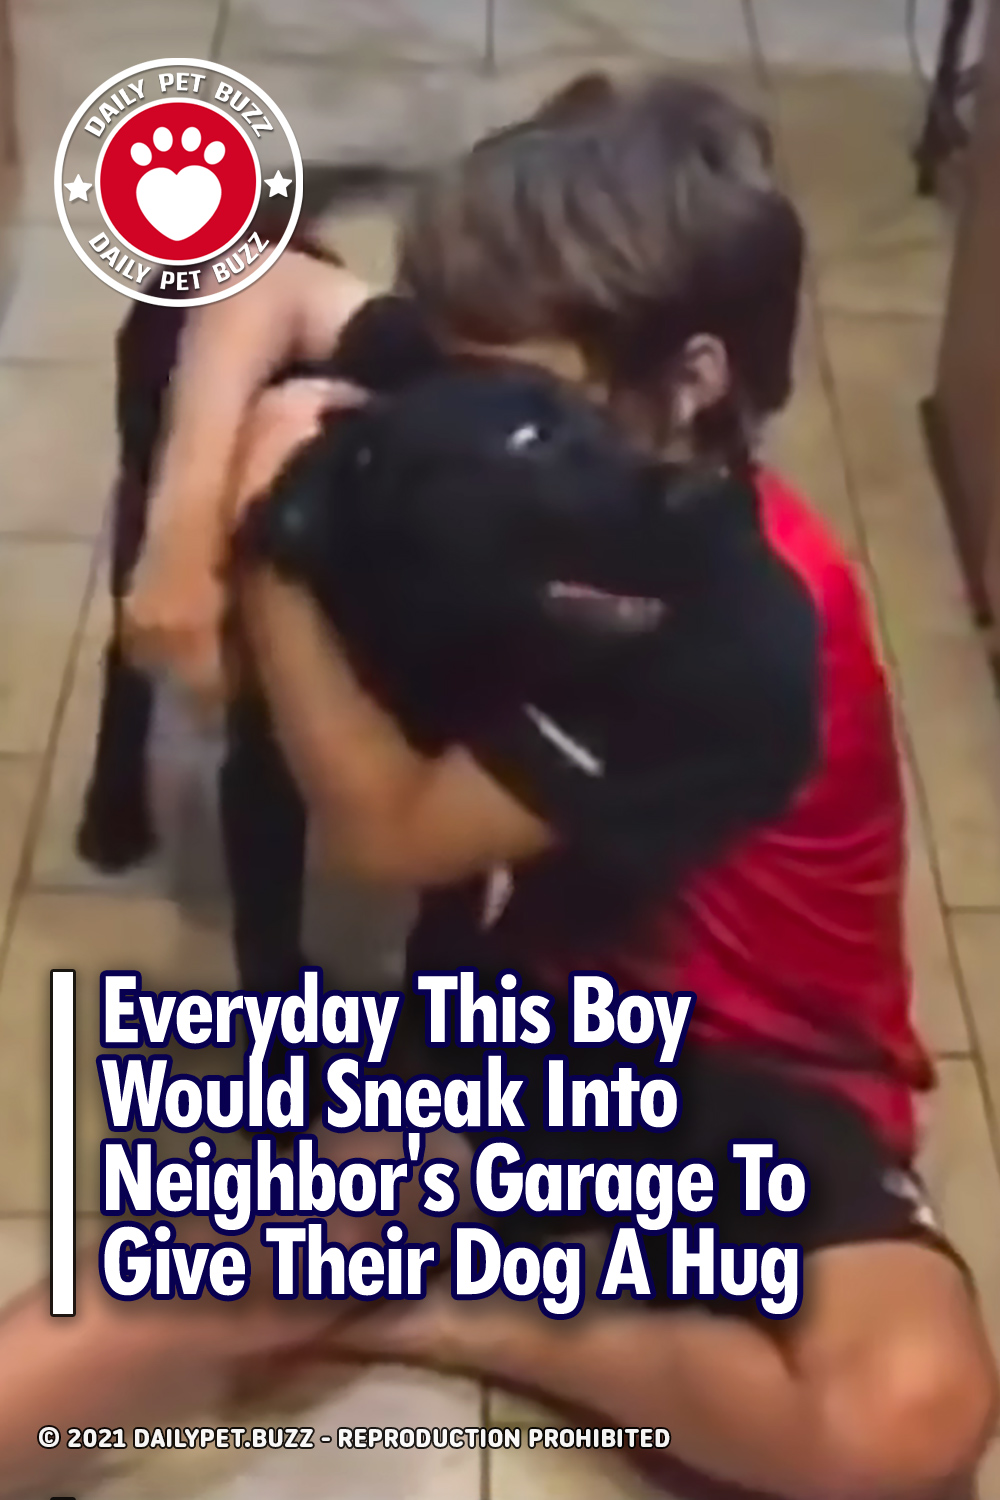 Everyday This Boy Would Sneak Into Neighbor\'s Garage To Give Their Dog A Hug